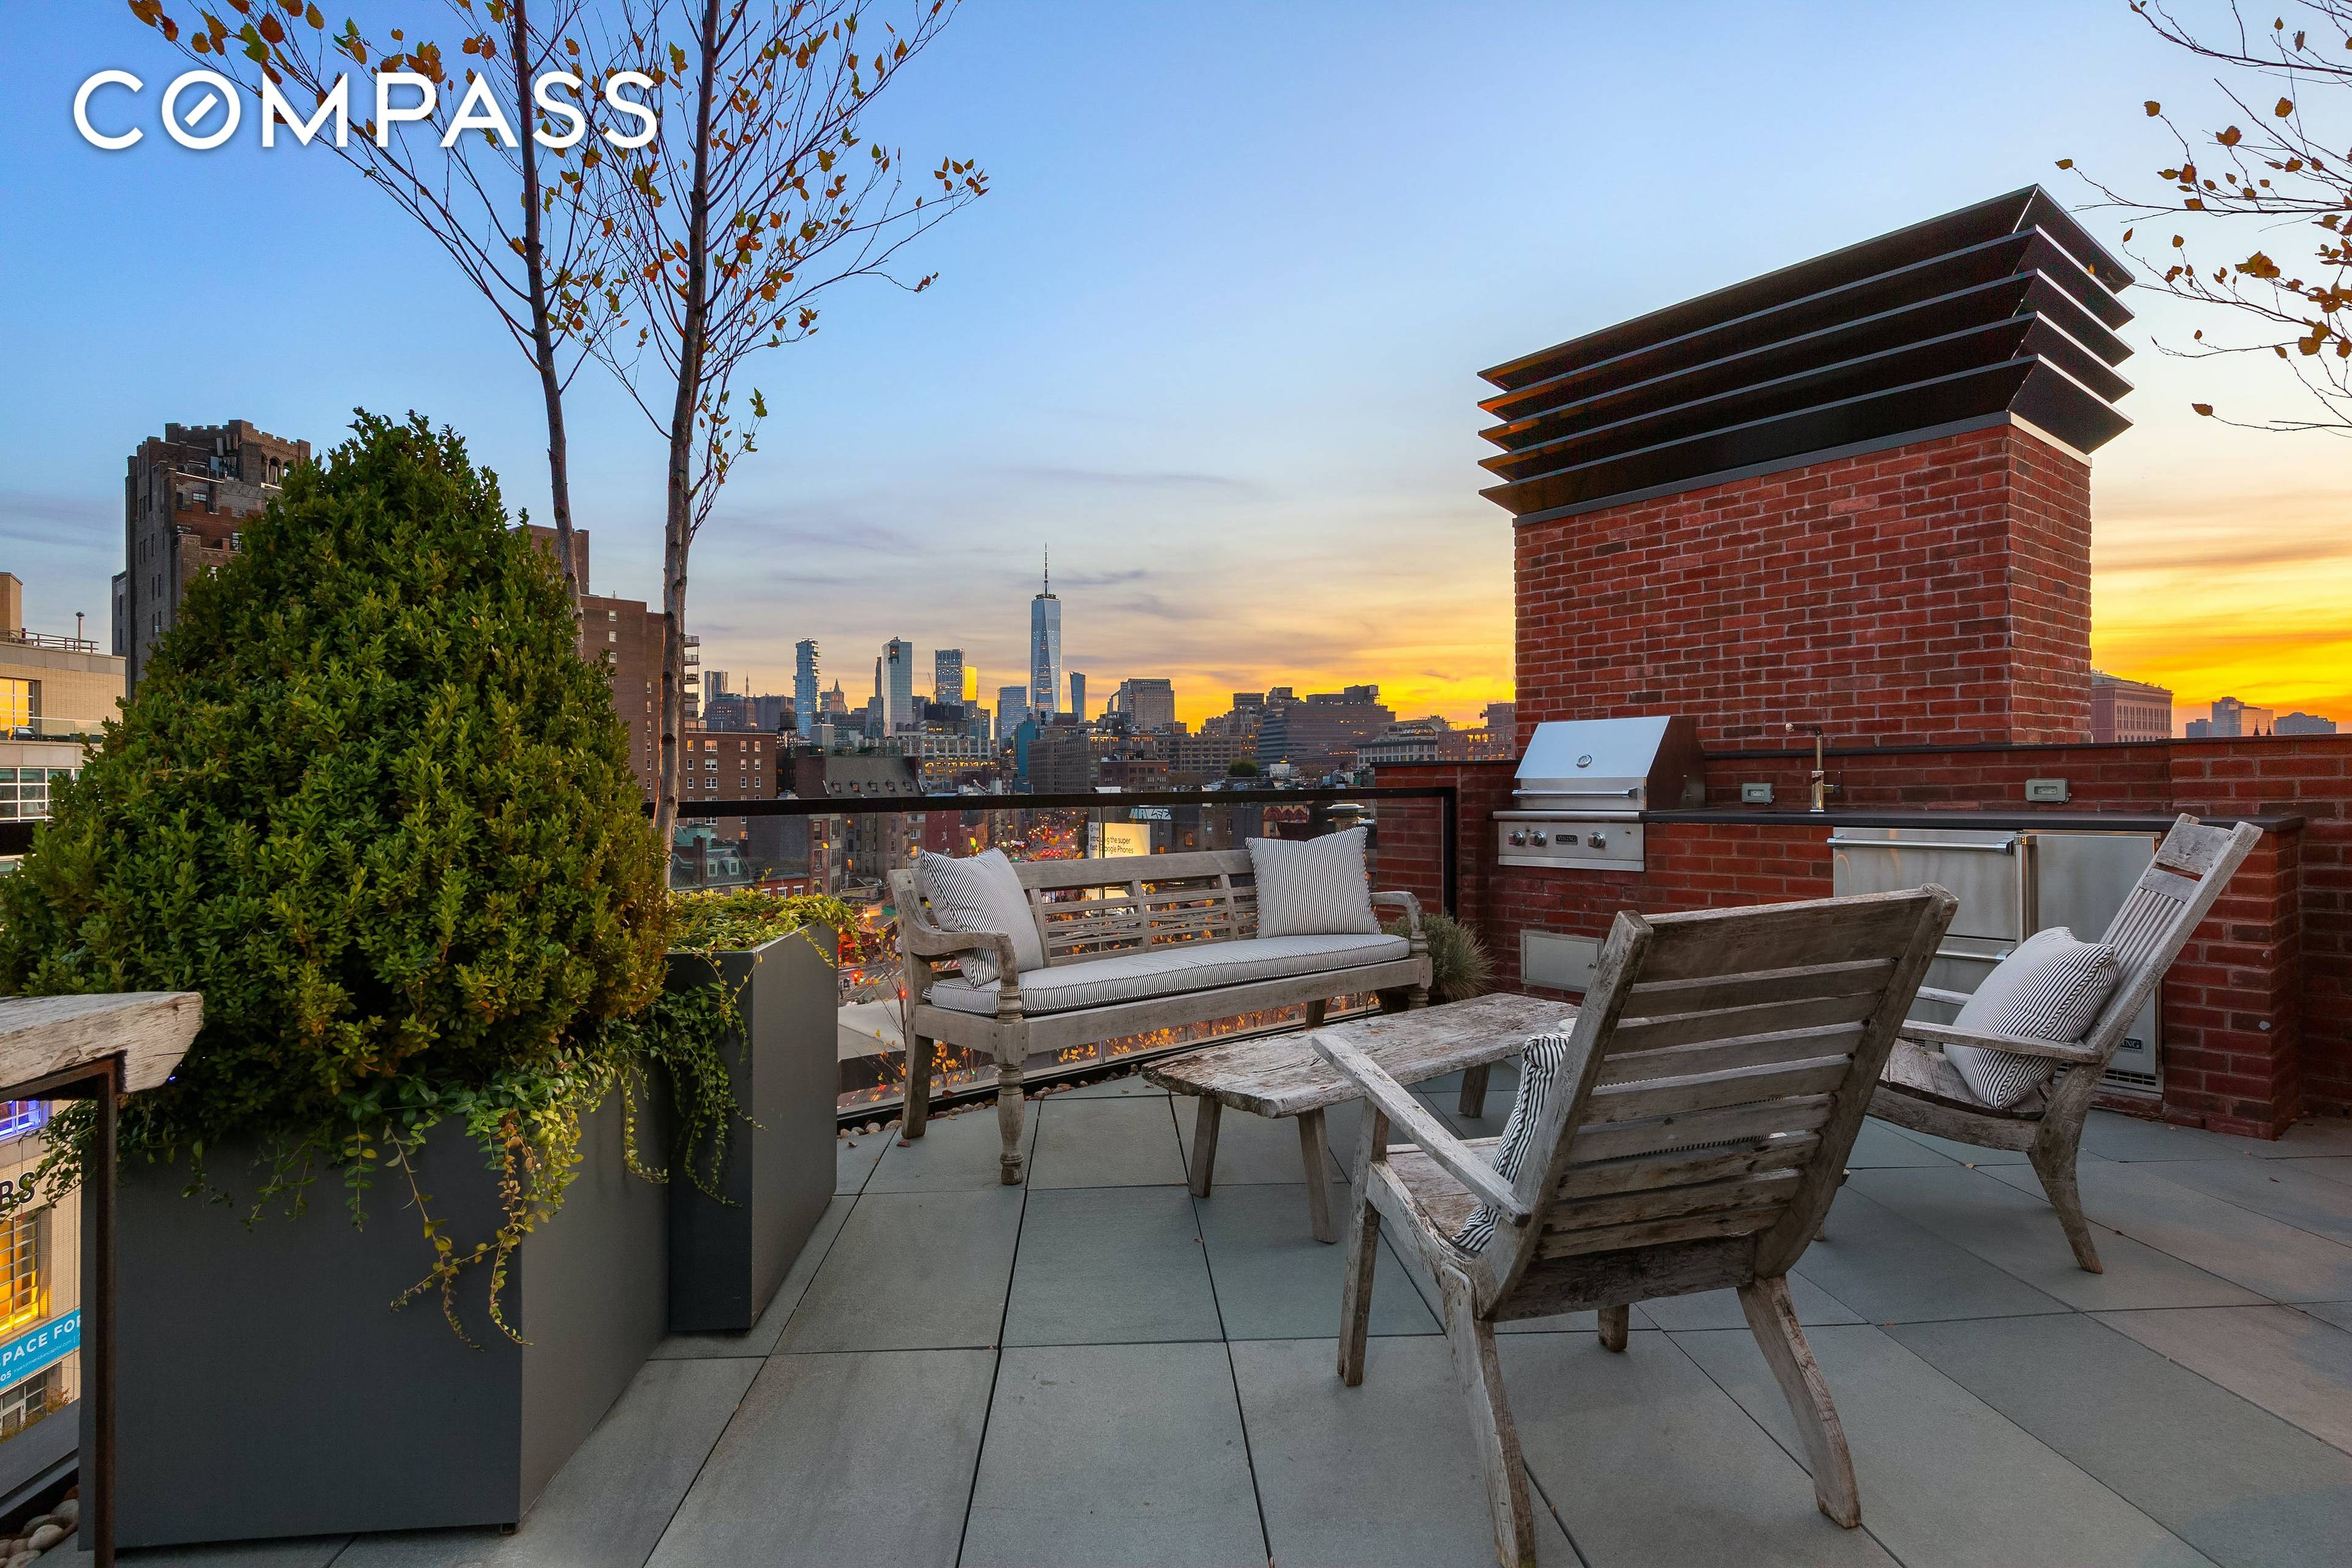 A veritable paragon of urban chic that reimagines the charm and elegance of the West Village through a contemporary lens, this remarkable 3 bedroom, 3 bathroom Penthouse duplex residence is ...